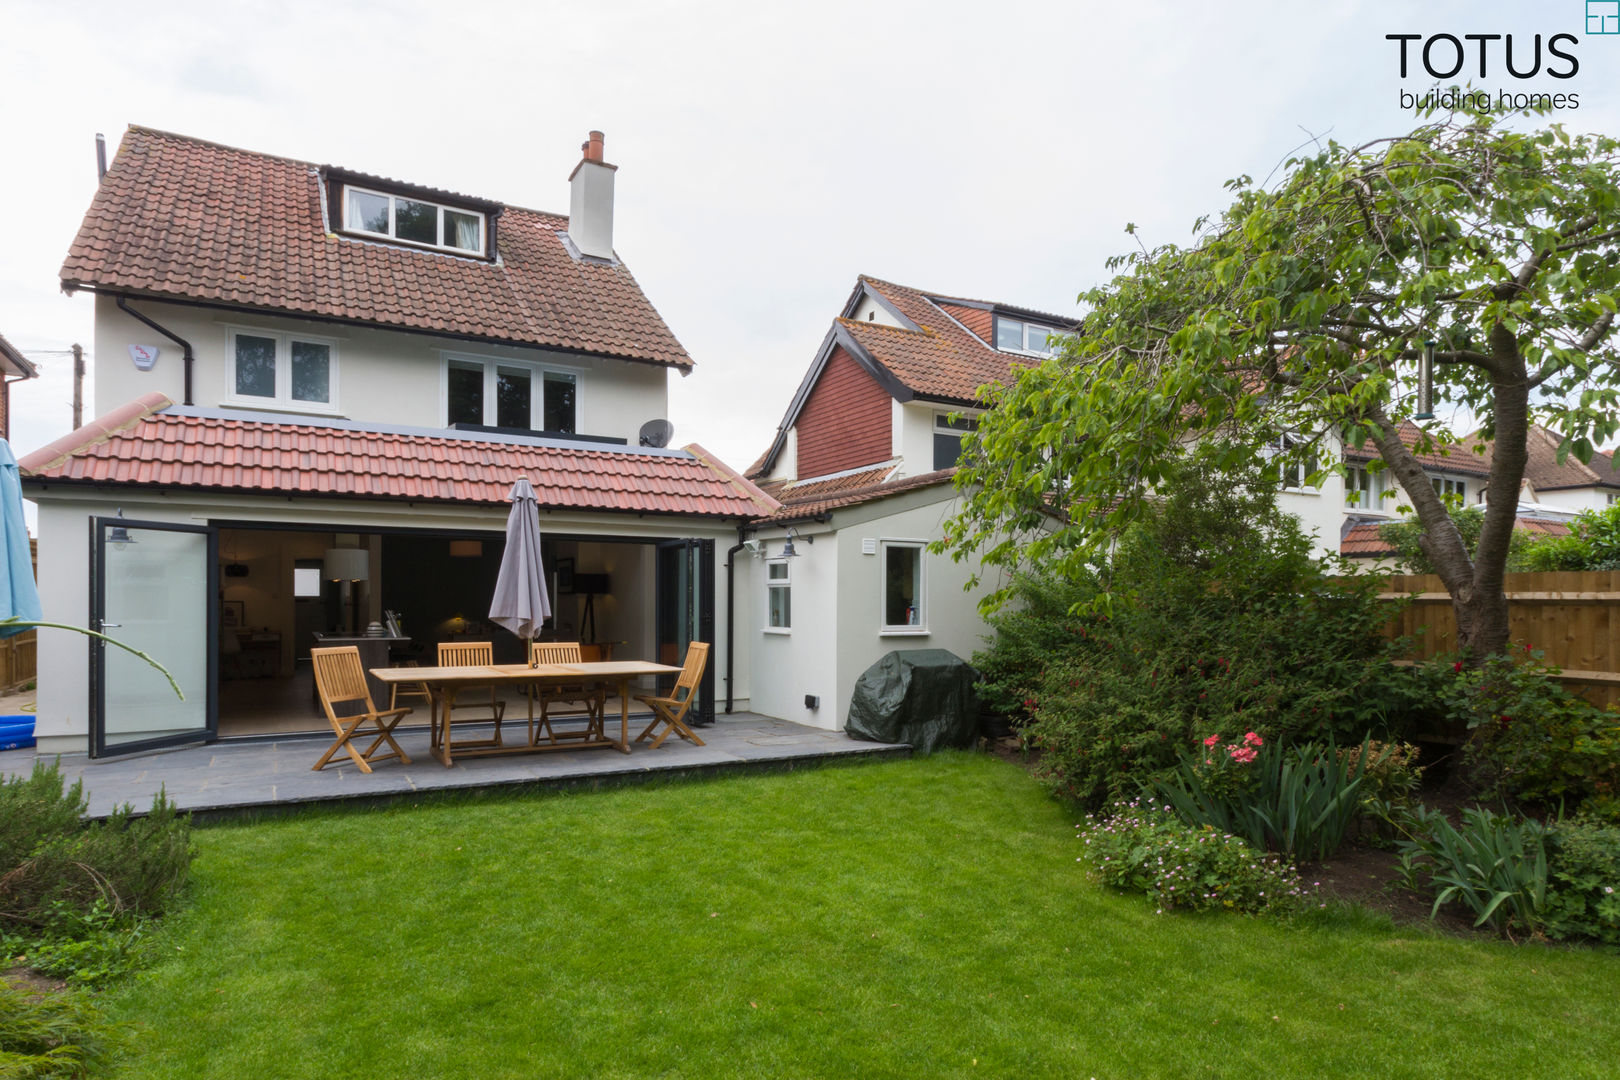 New life for a 1920s home - extension and full renovation, Thames Ditton, Surrey, TOTUS TOTUS Casas clásicas